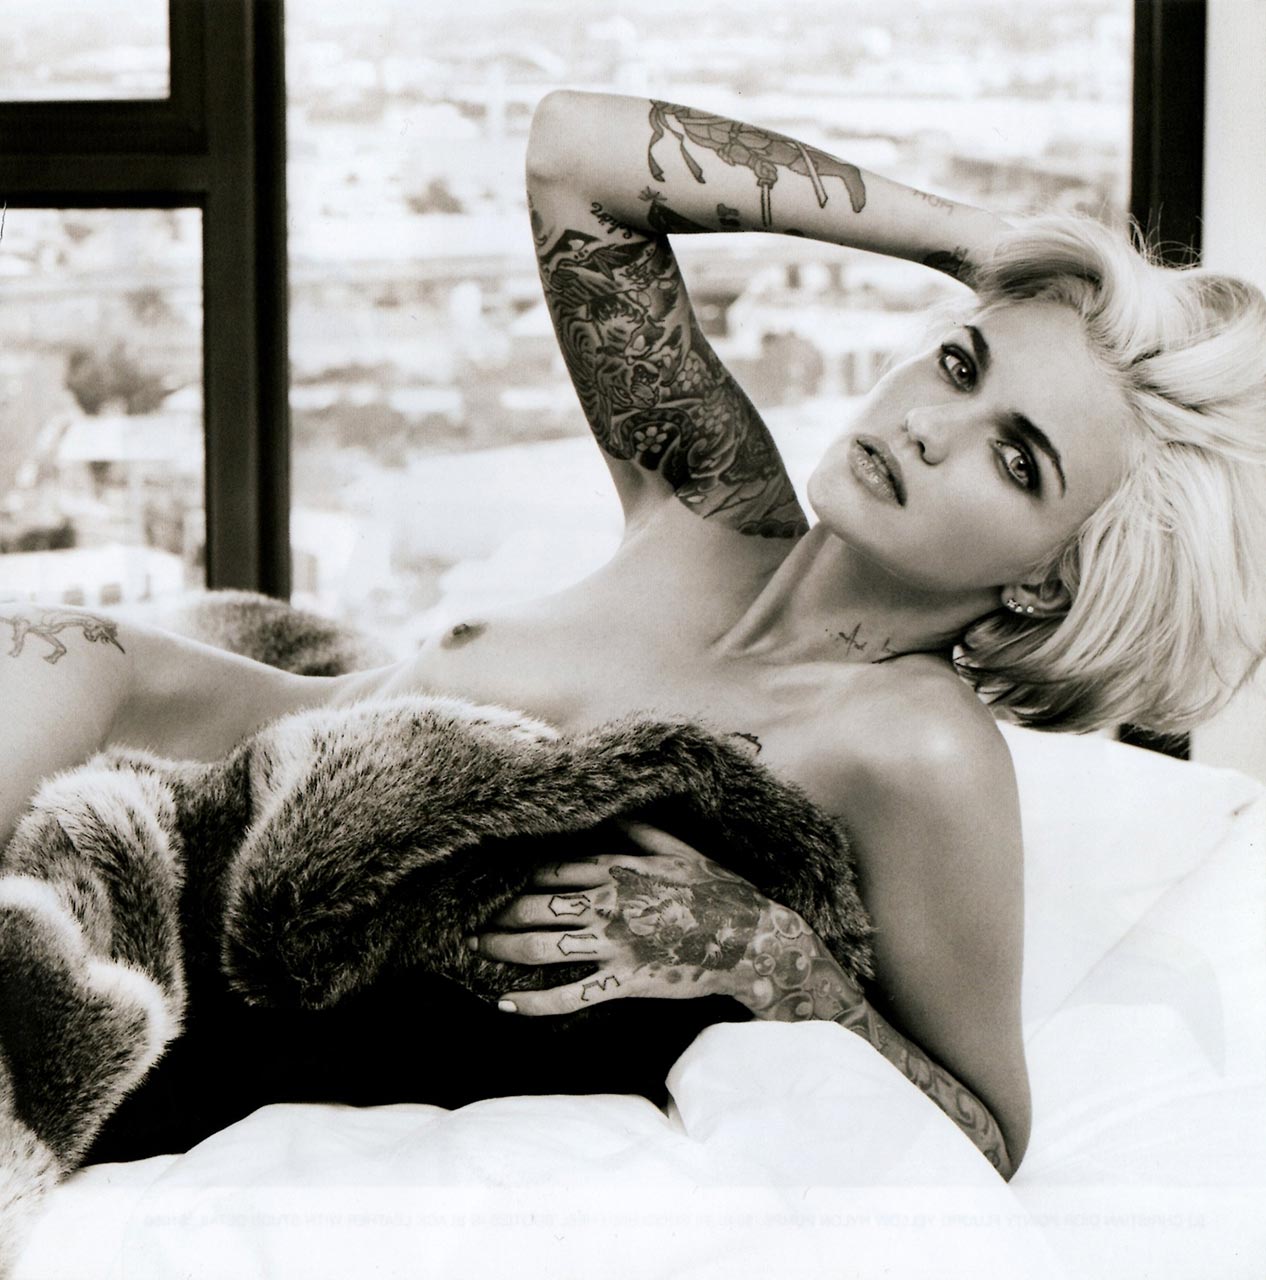 Lesbian Actress Ruby Rose Nude Photos Scandal Planet